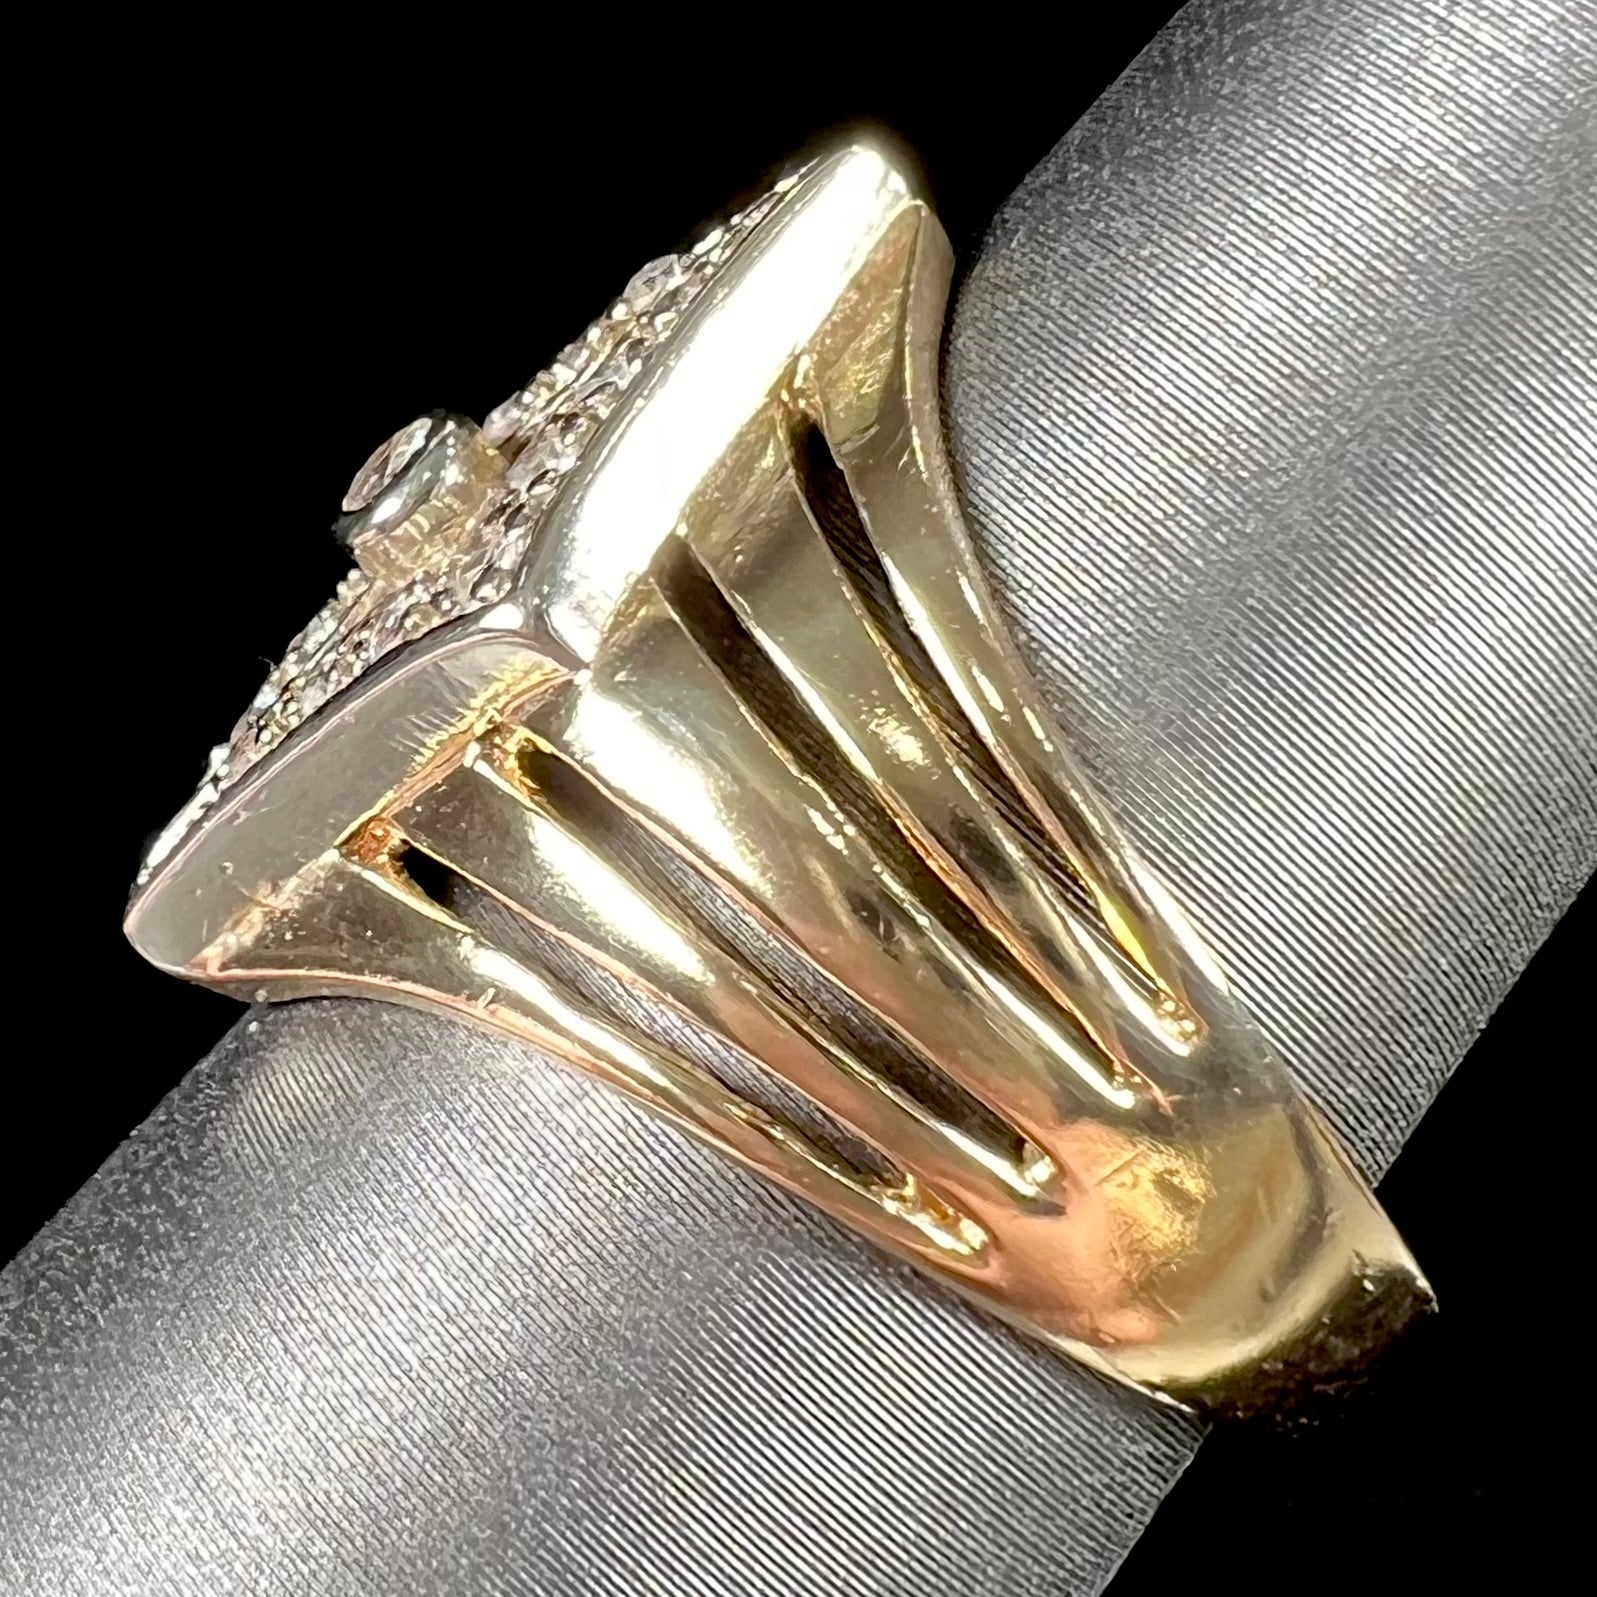 An estate ladies' gold diamond ring.  The shape of the ring resembles an art deco style diamond.